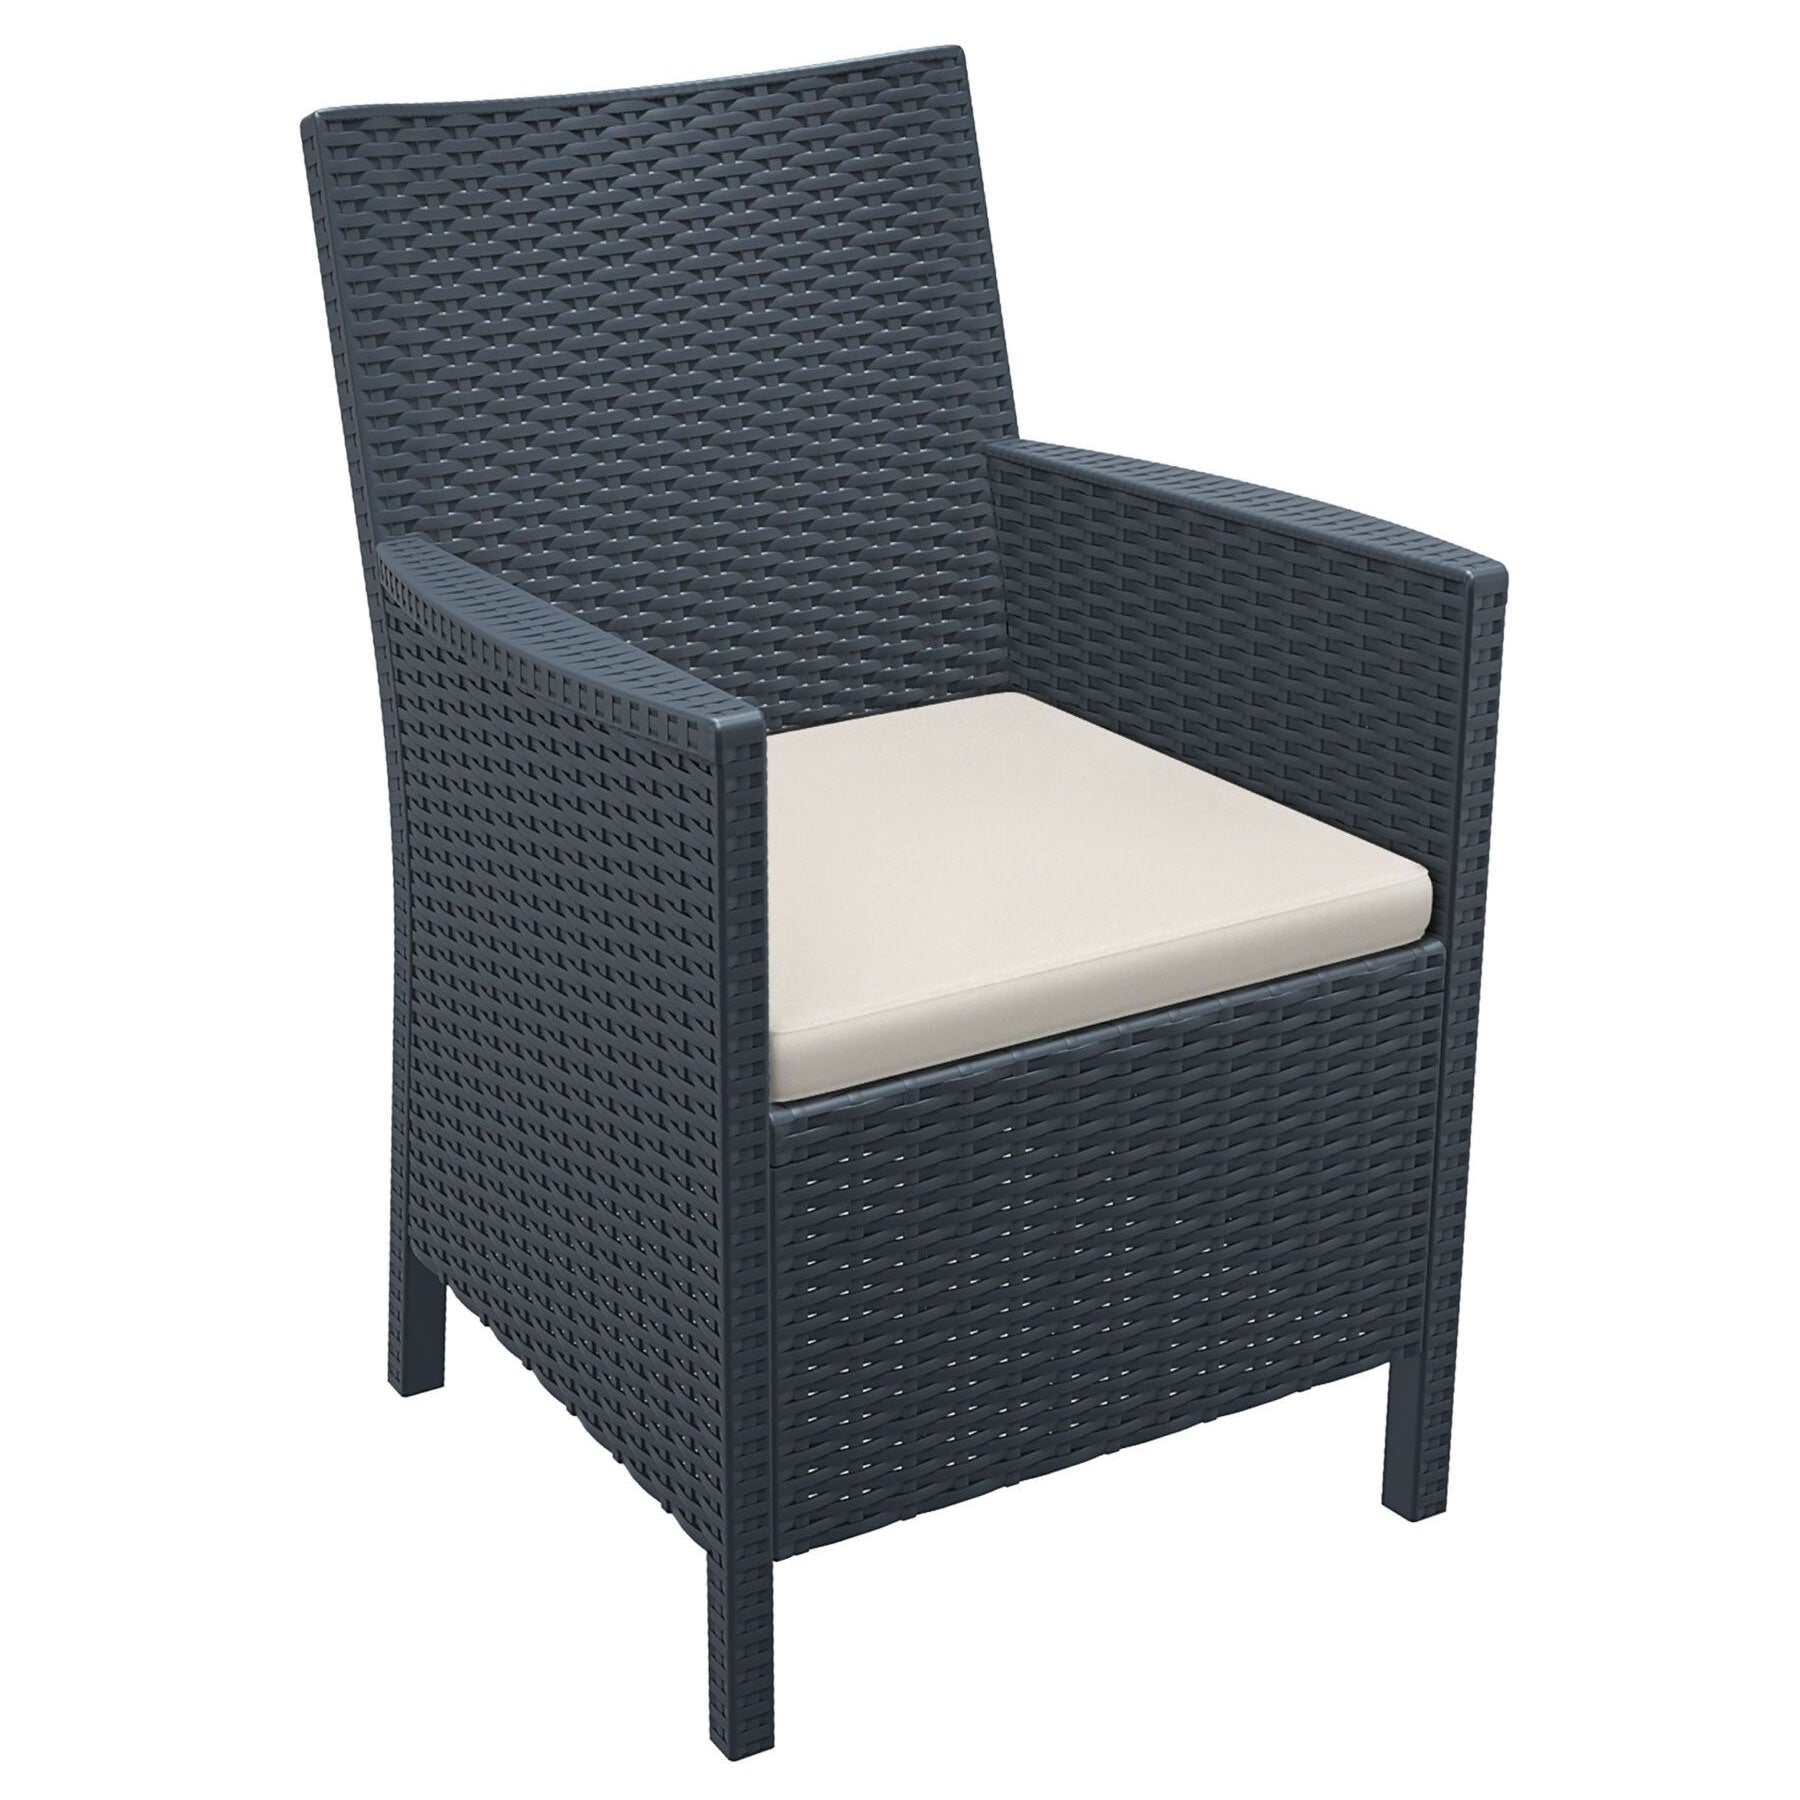 Napier | Resin Outdoor Dining Chairs With Arms | Dark Grey